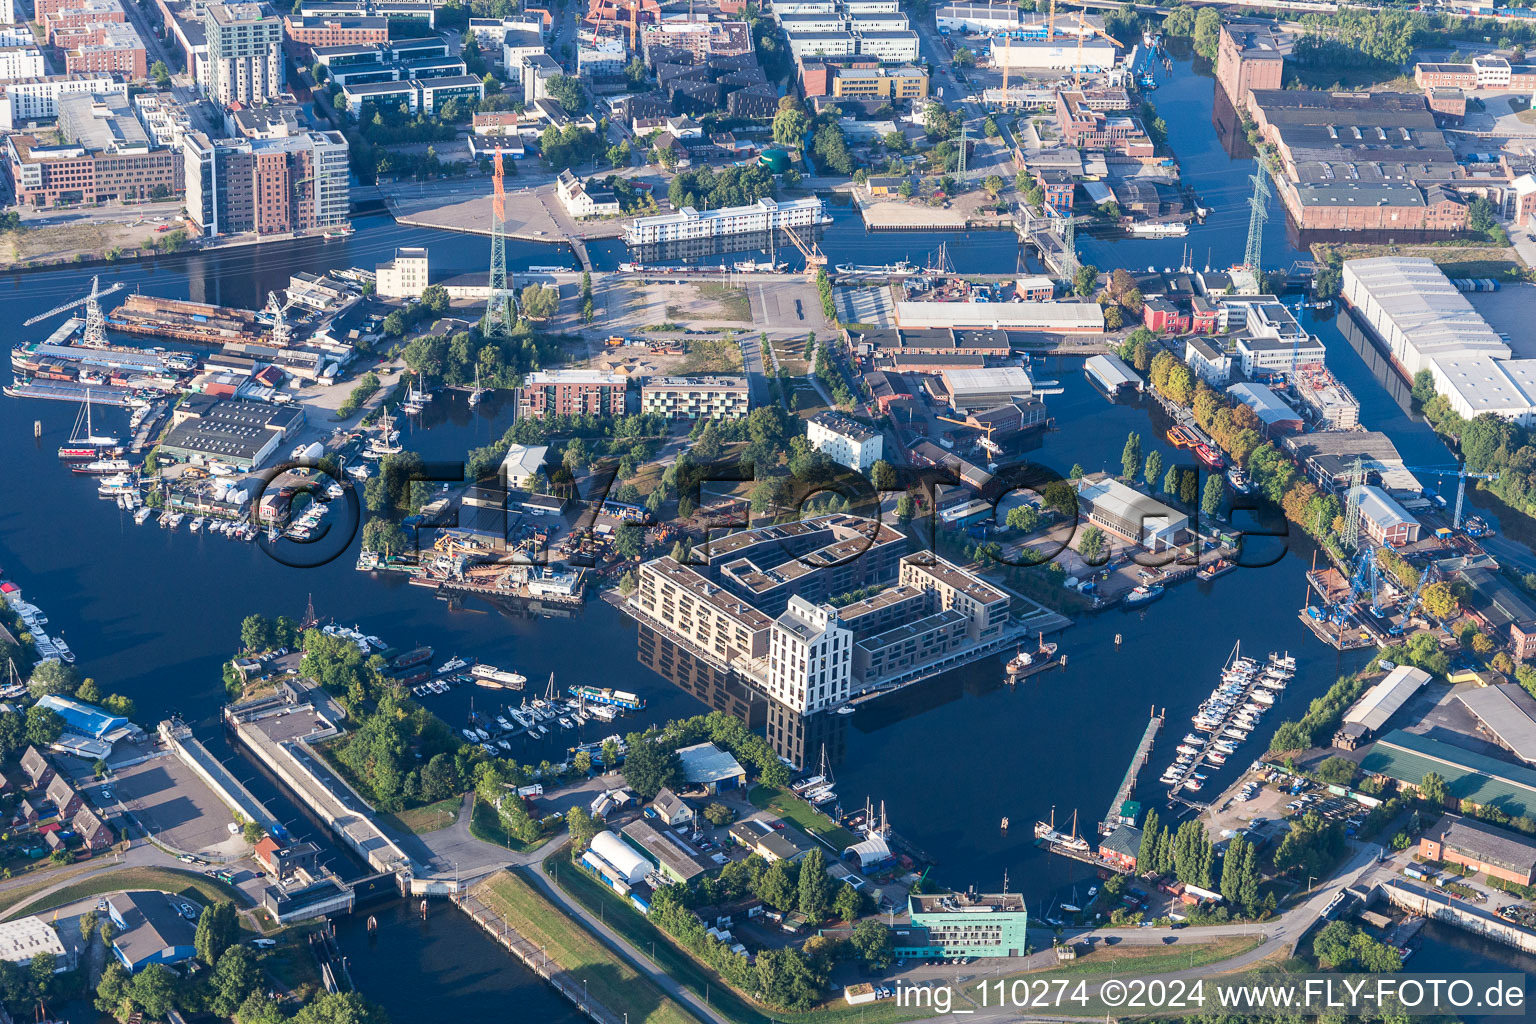 Aerial view of Castle-Island on the banks of the ports of Harburg in the district Harburg in Hamburg, Germany